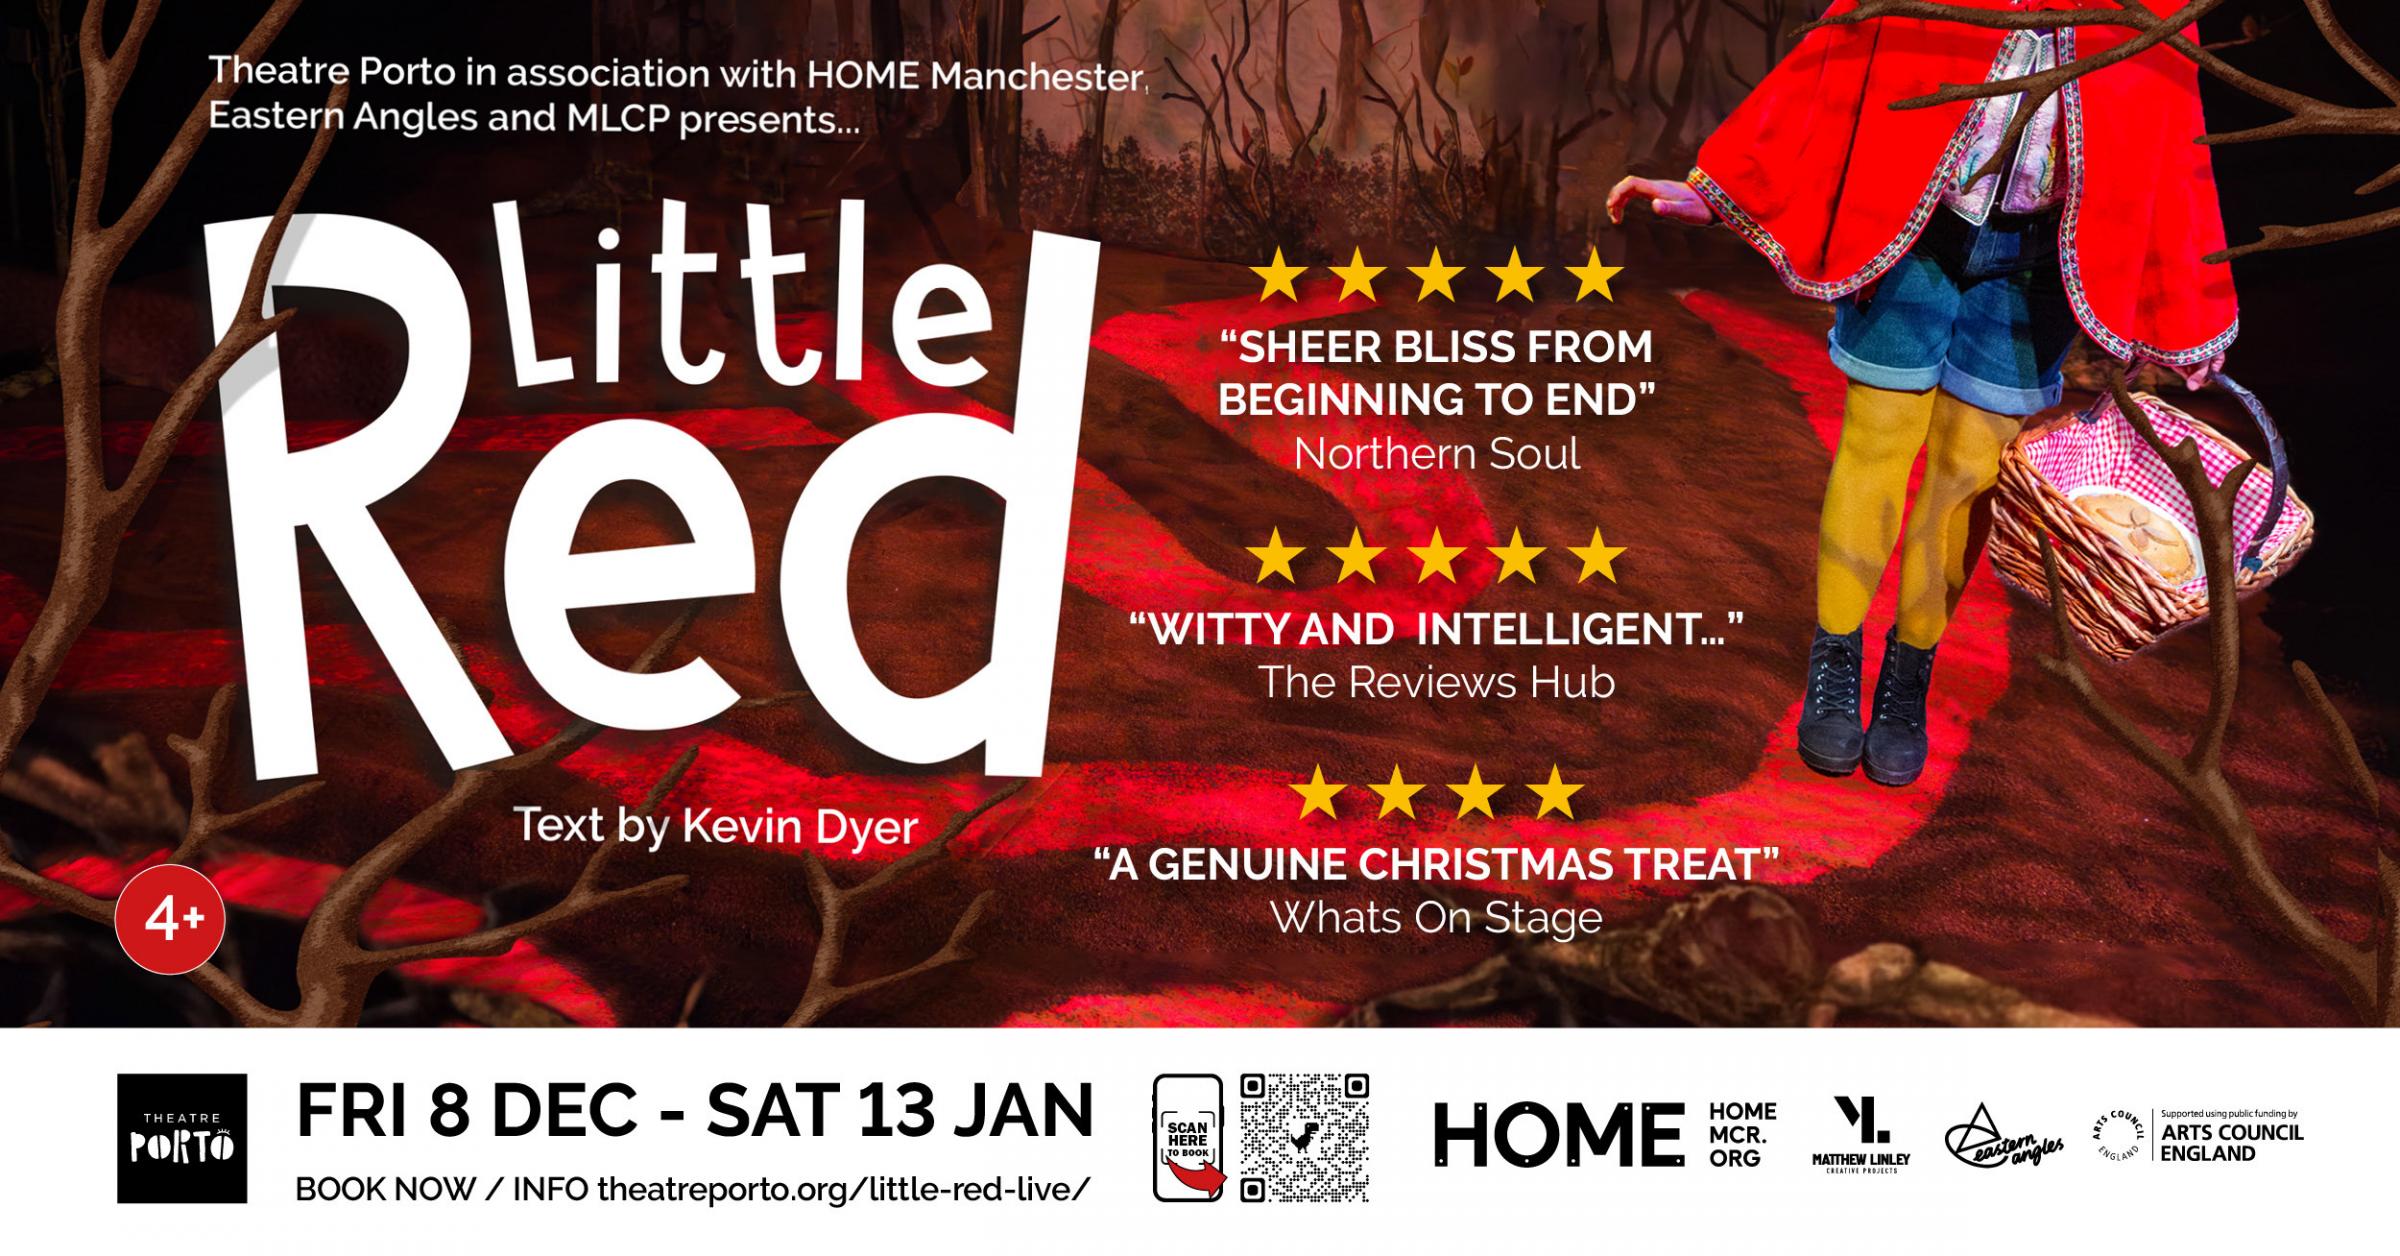 Little Red is coming to Theatre Porto.